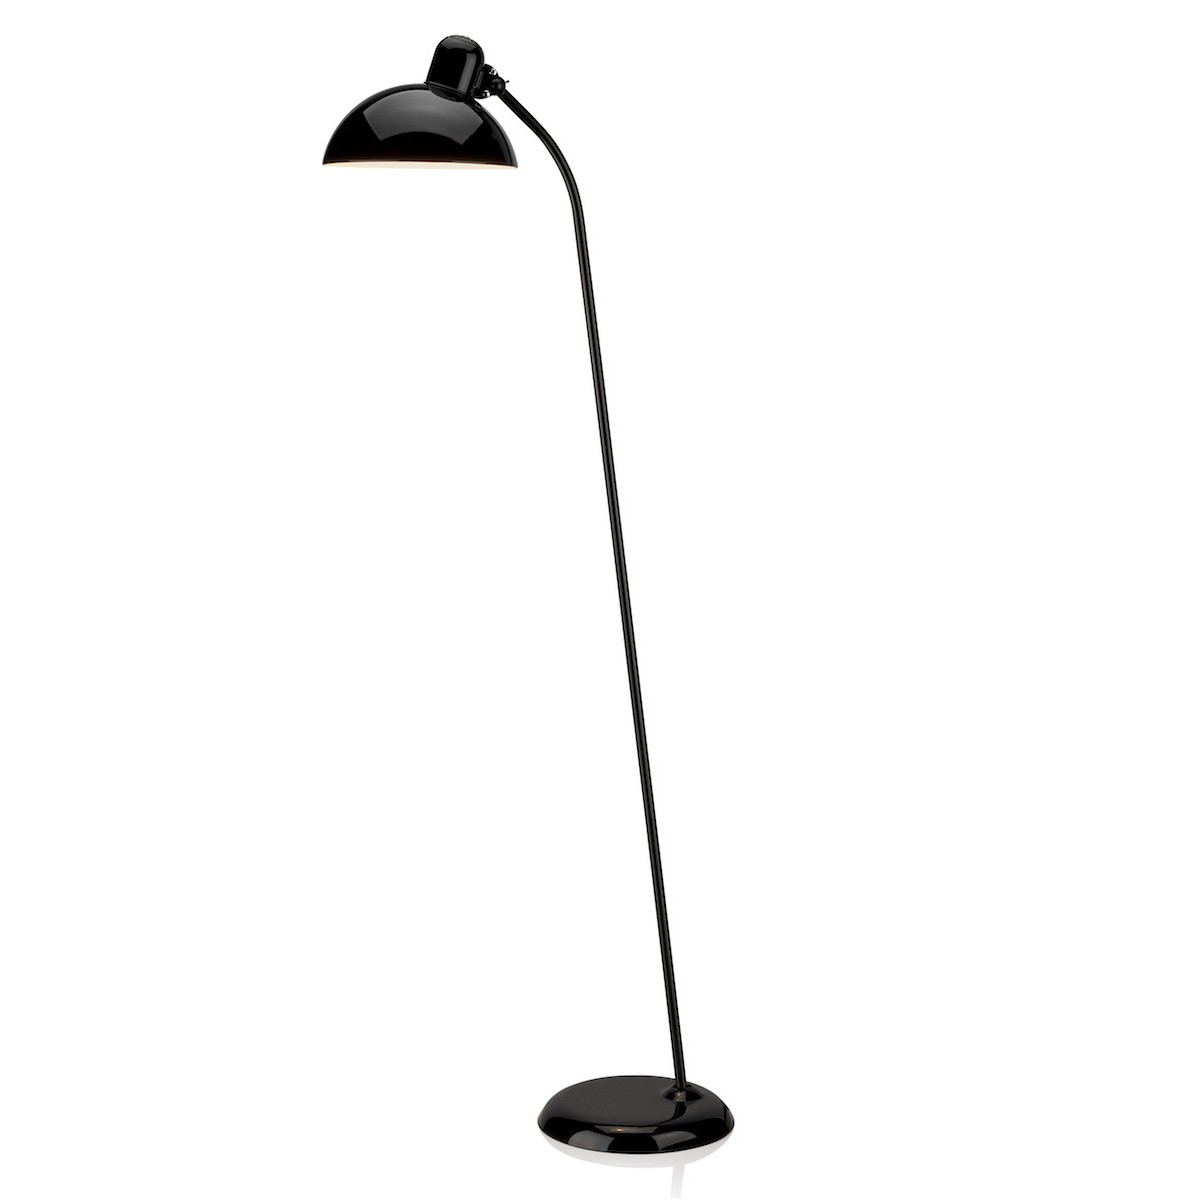 noir brillant - inclinable - lampadaire Kaiser idell - 6556-F